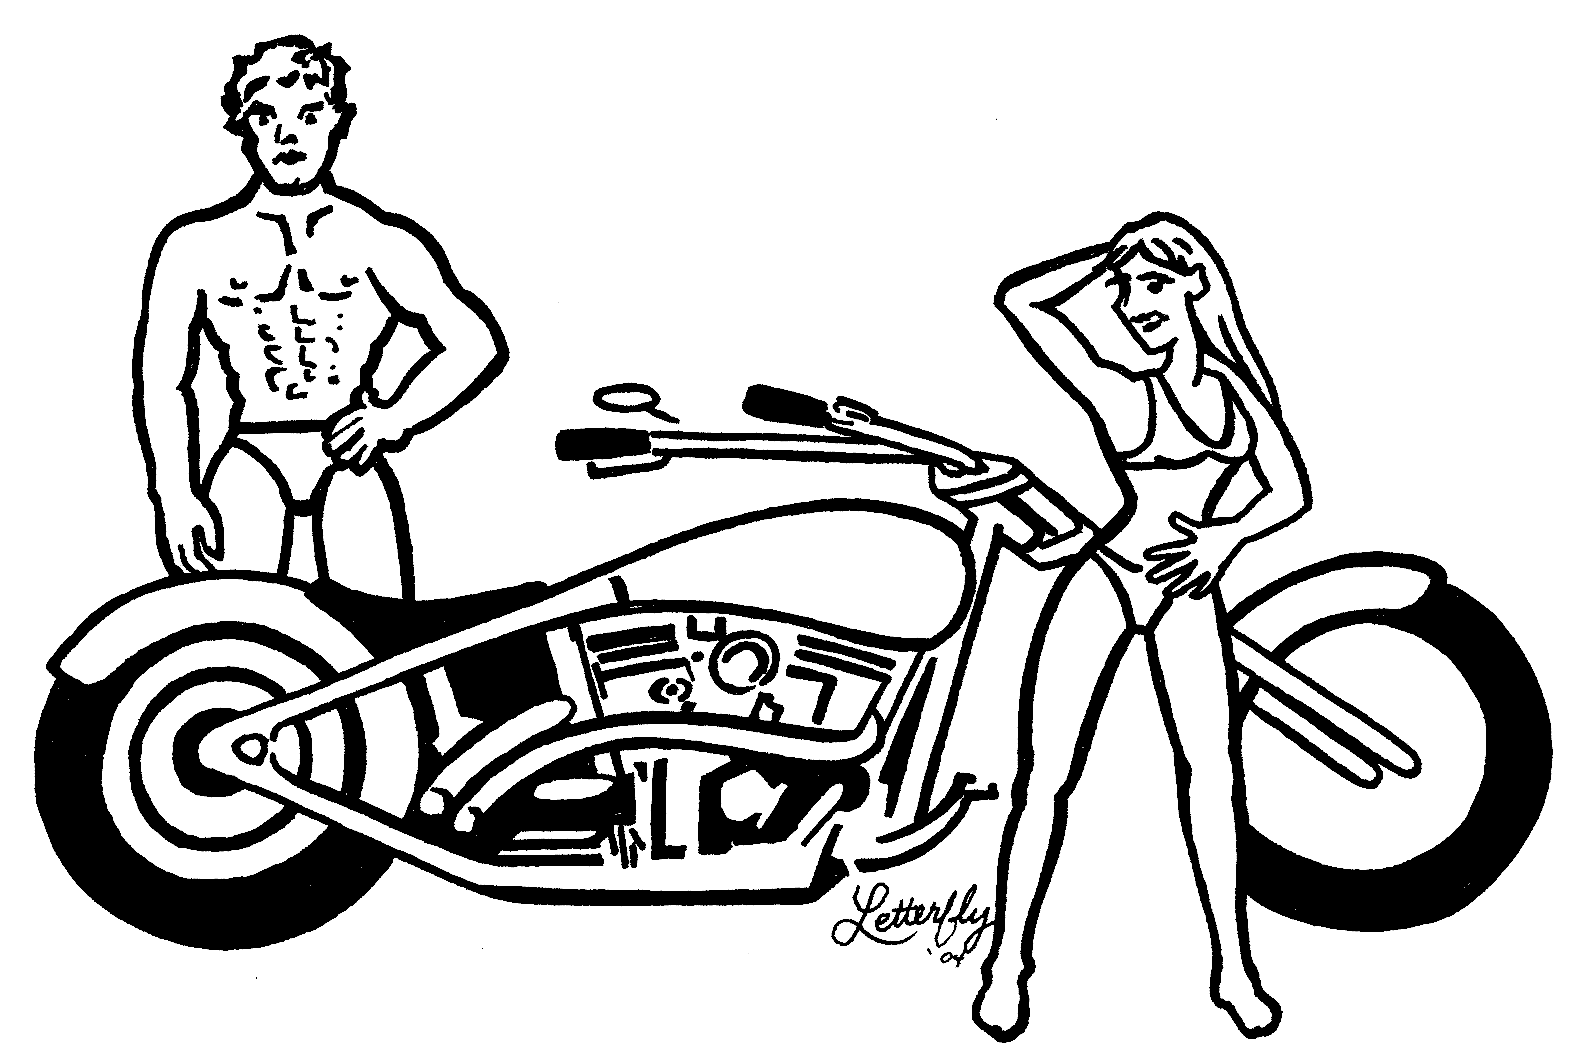 Harley davidson ask letterfly clipart 2